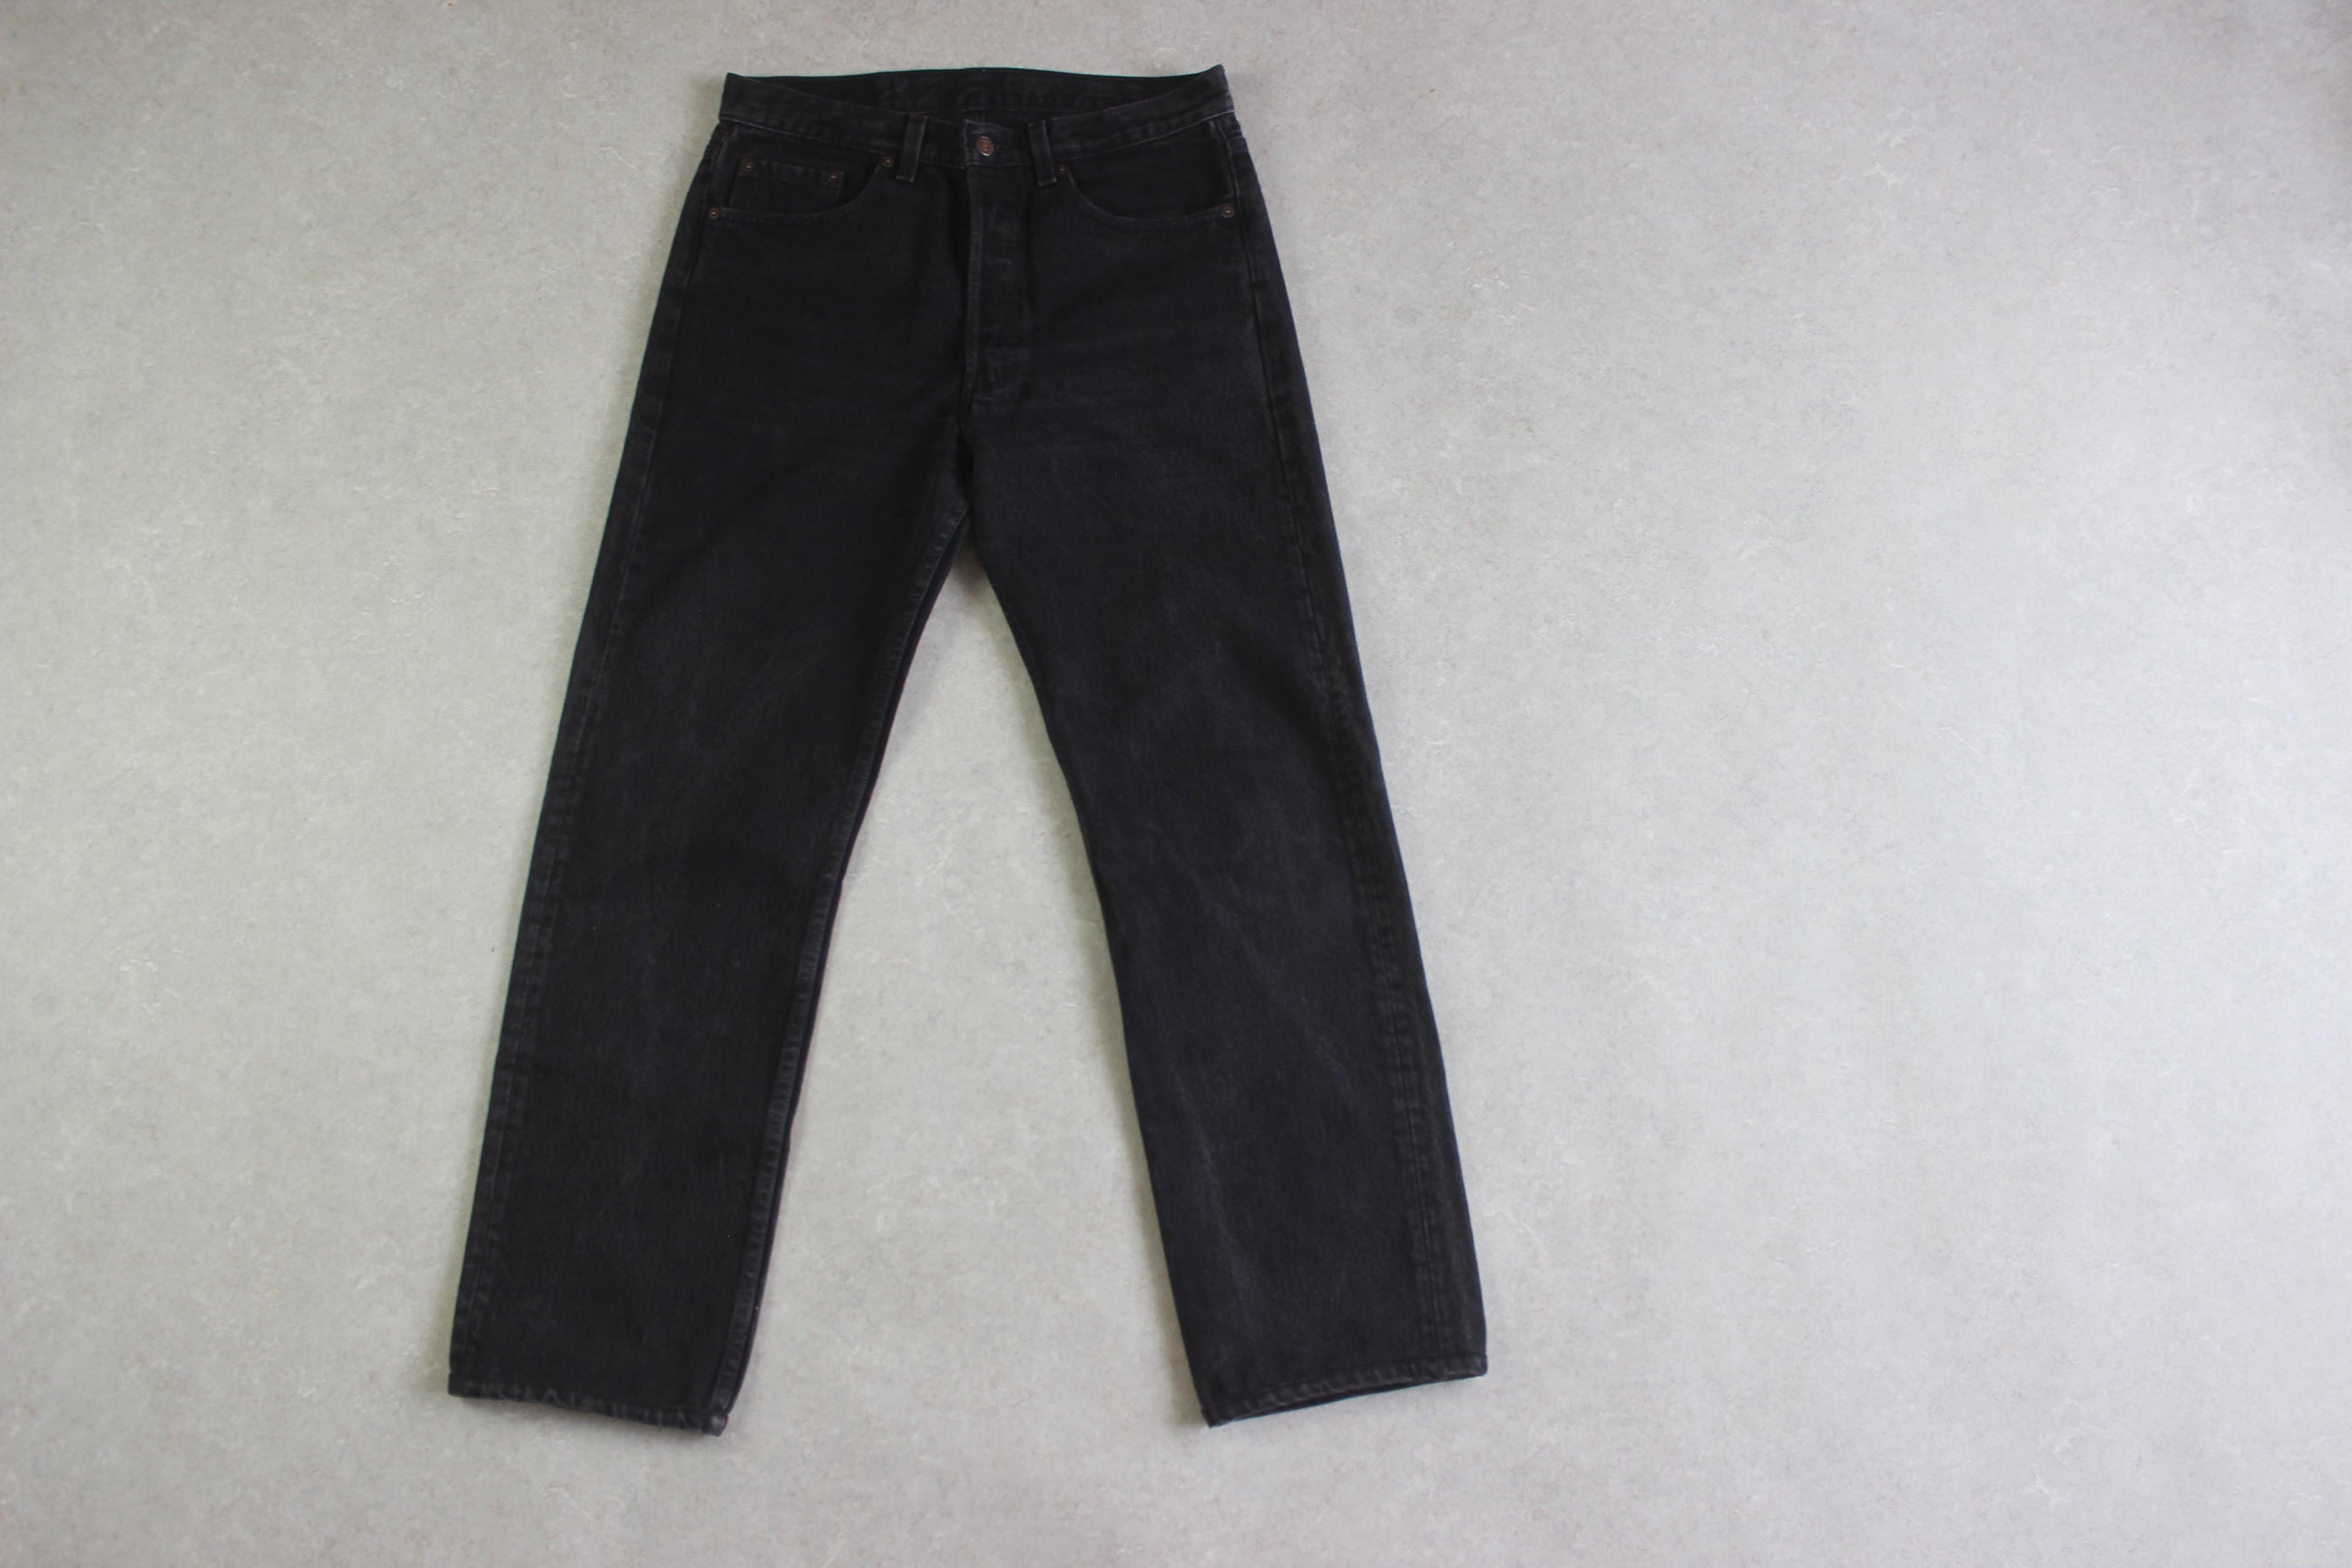 Levi's - Vintage 501 Made in USA Jeans - Black - 31/30